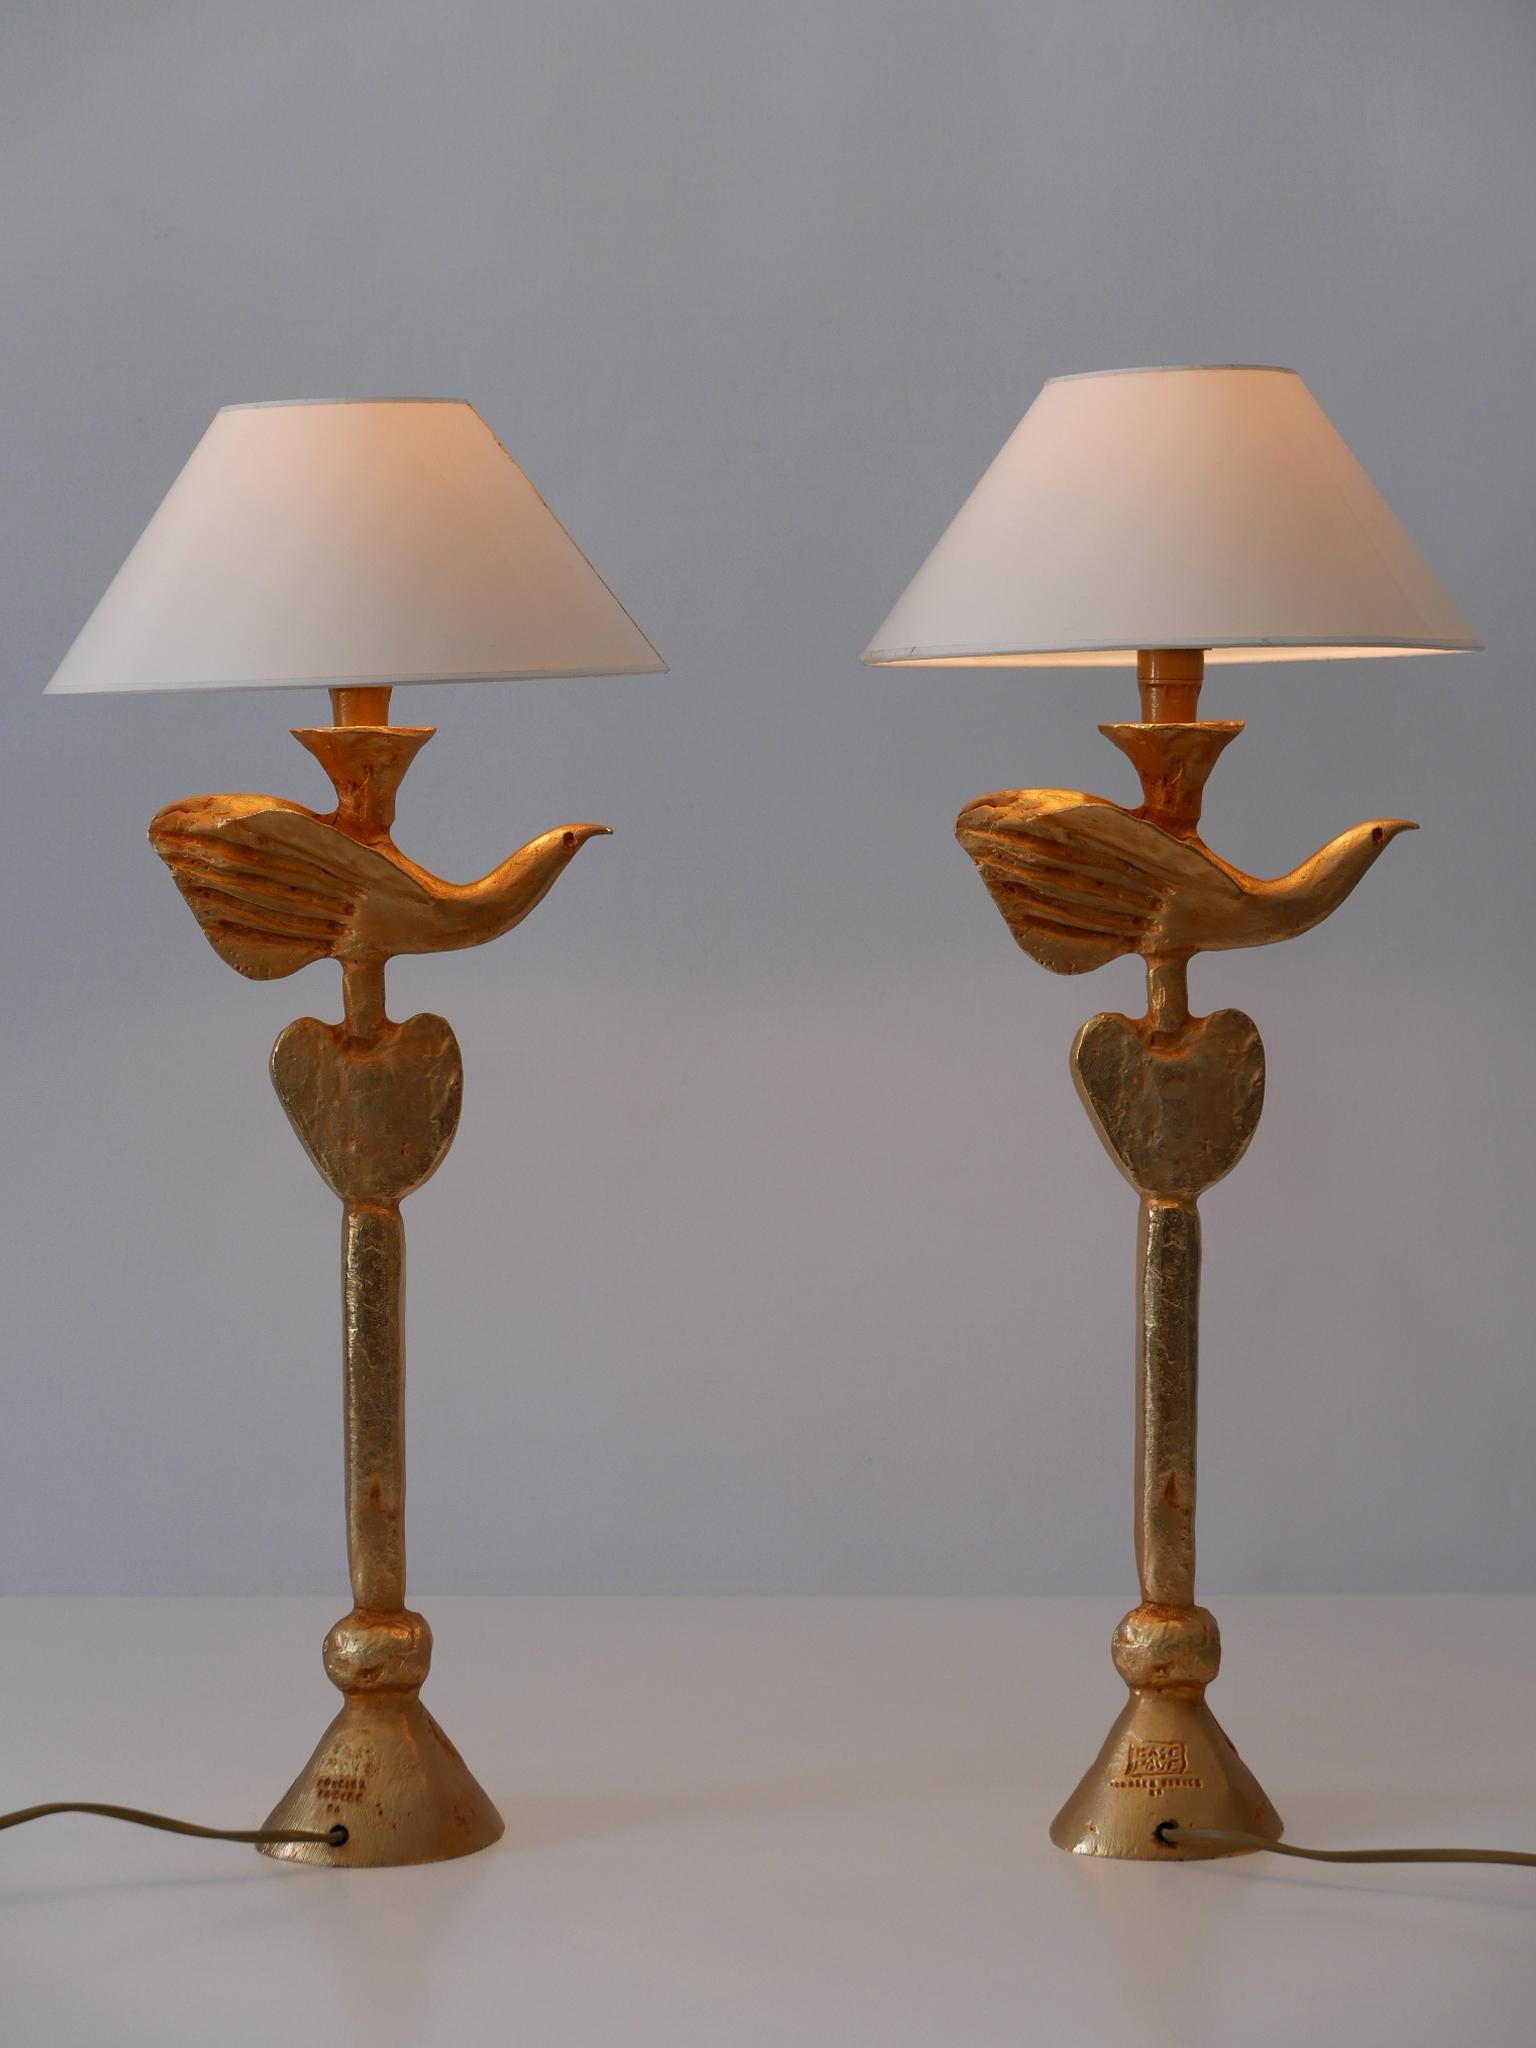 Set of two gorgeous sculptural table lamps 'dove'. Exceptional work by Pierre Casenove for Fondica, 1980s, France.

Executed in gilt bronze, each lamp comes with 1 x E14 / E12 Edison screw fit bulb holder, is wired, in working condition and runs